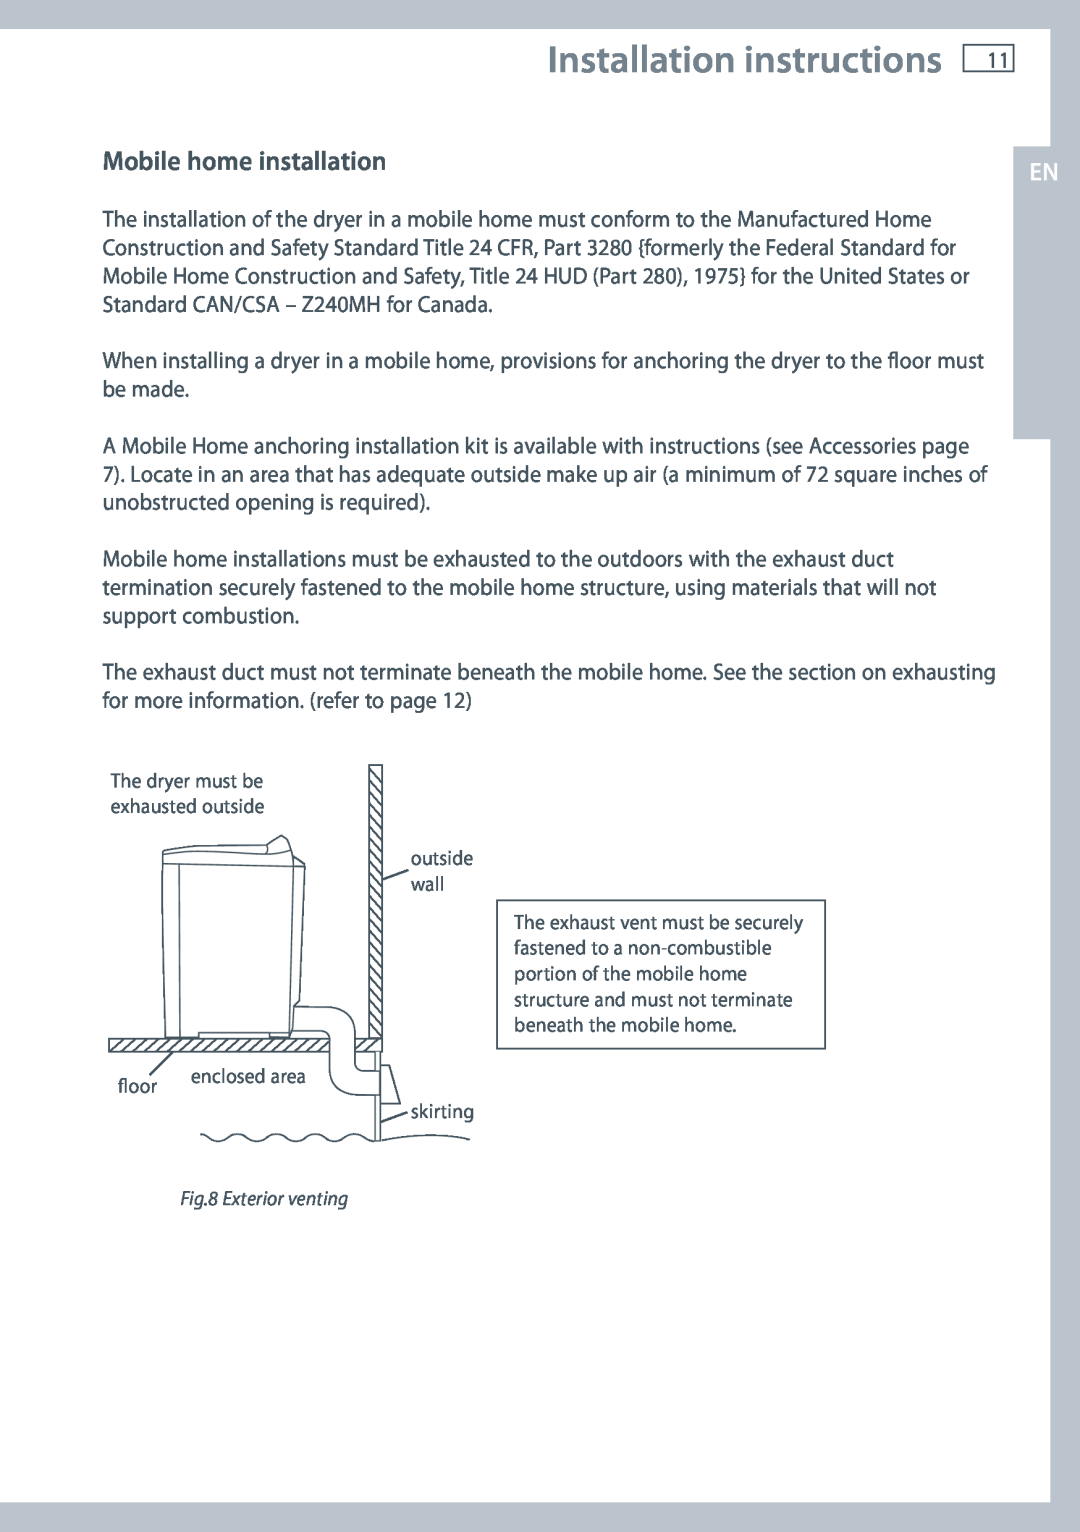 Fisher & Paykel DE62T27C, DG62T27C Installation instructions, Mobile home installation, floor, outside wall, skirting 